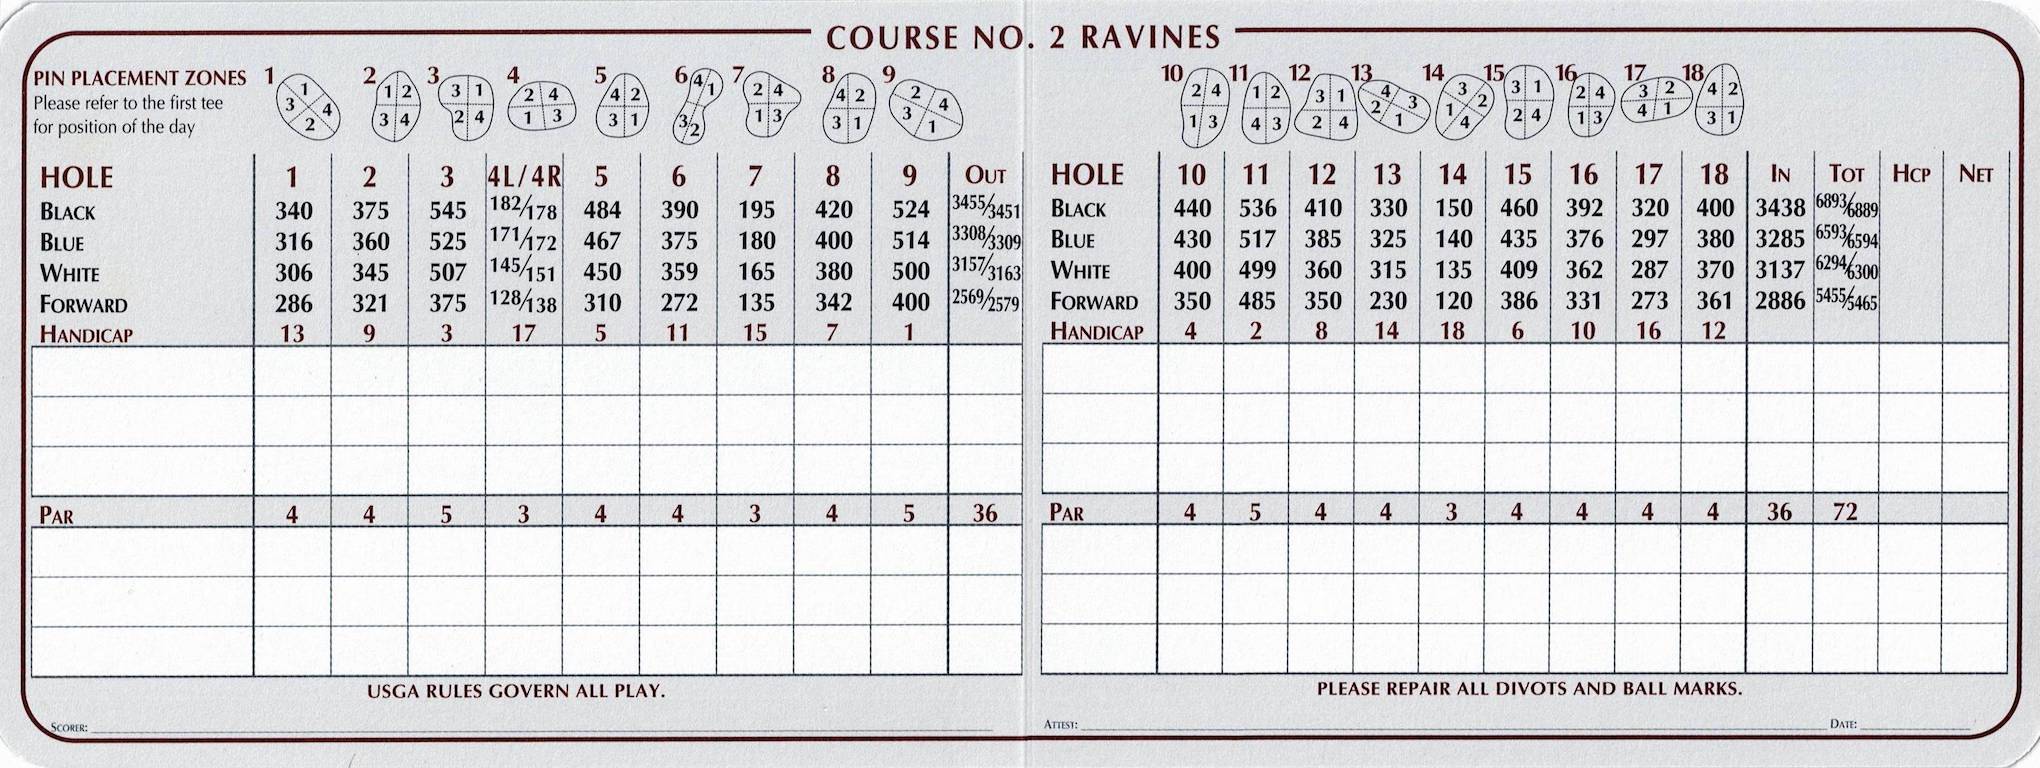 Scan of the scorecard from Cog Hill Course #2 - Ravines in Palos Park, Illinois. Note that hole 4 has two completely separate tee boxes and greens, called 4L and 4R, which add variety to the course depending on when you play it.